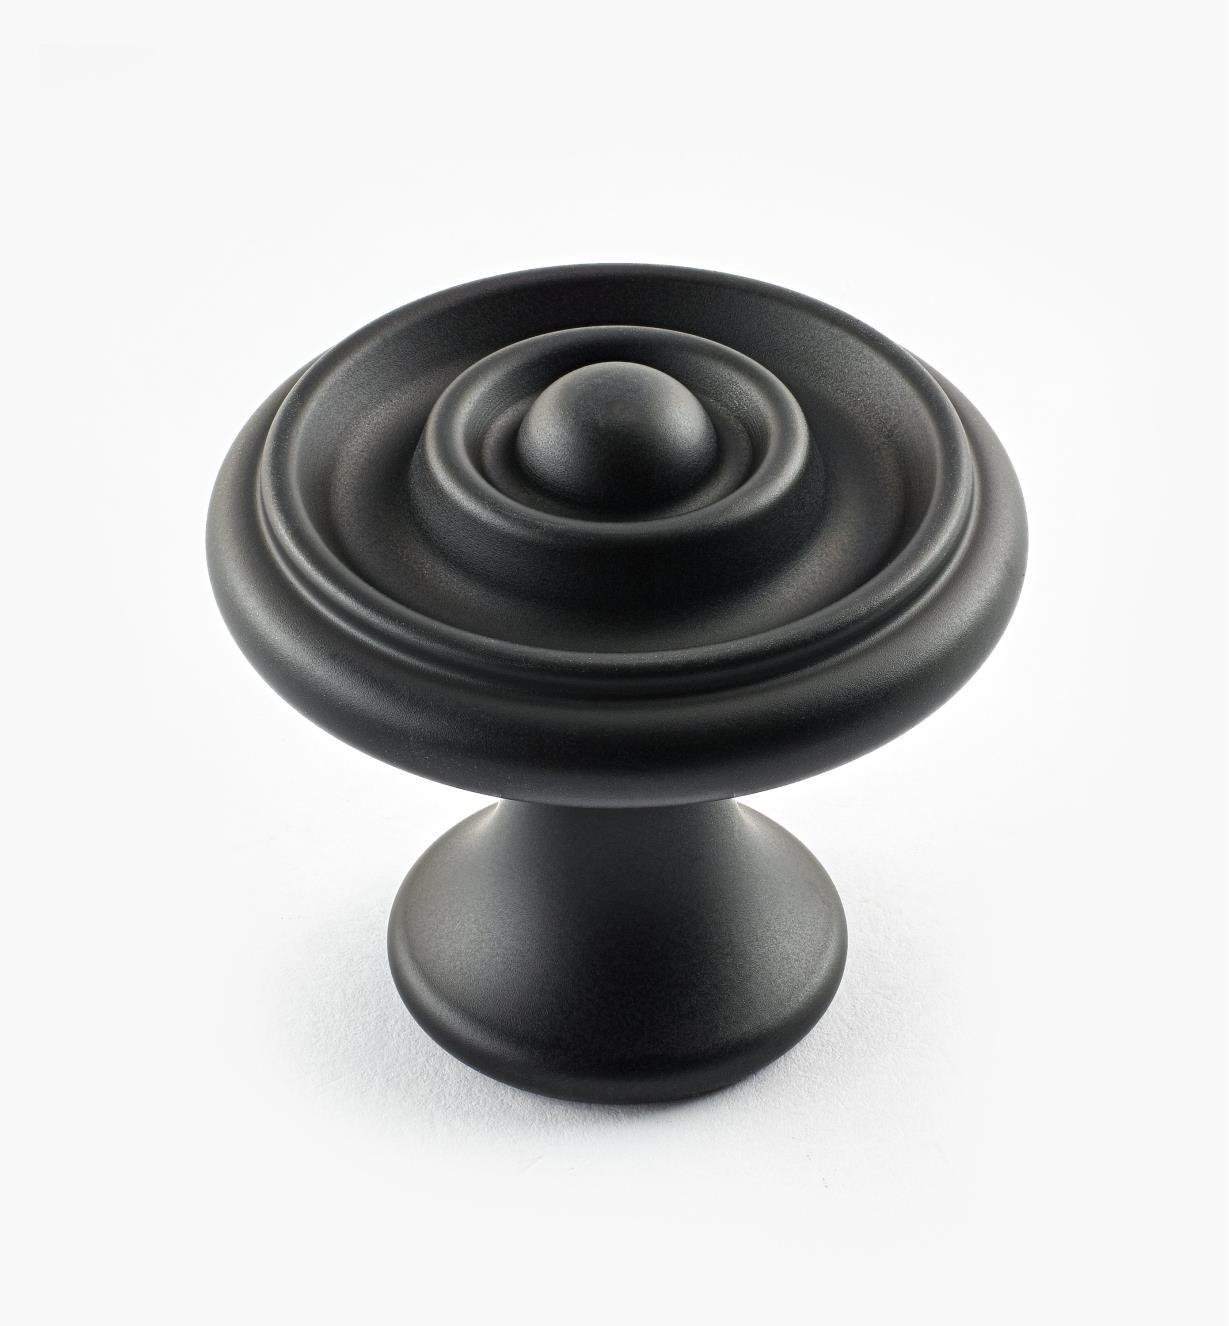 02W3242 - Oil-Rubbed Bronze Suite - 1 5/8" x 1 1/2" Turned Brass Raised Knob